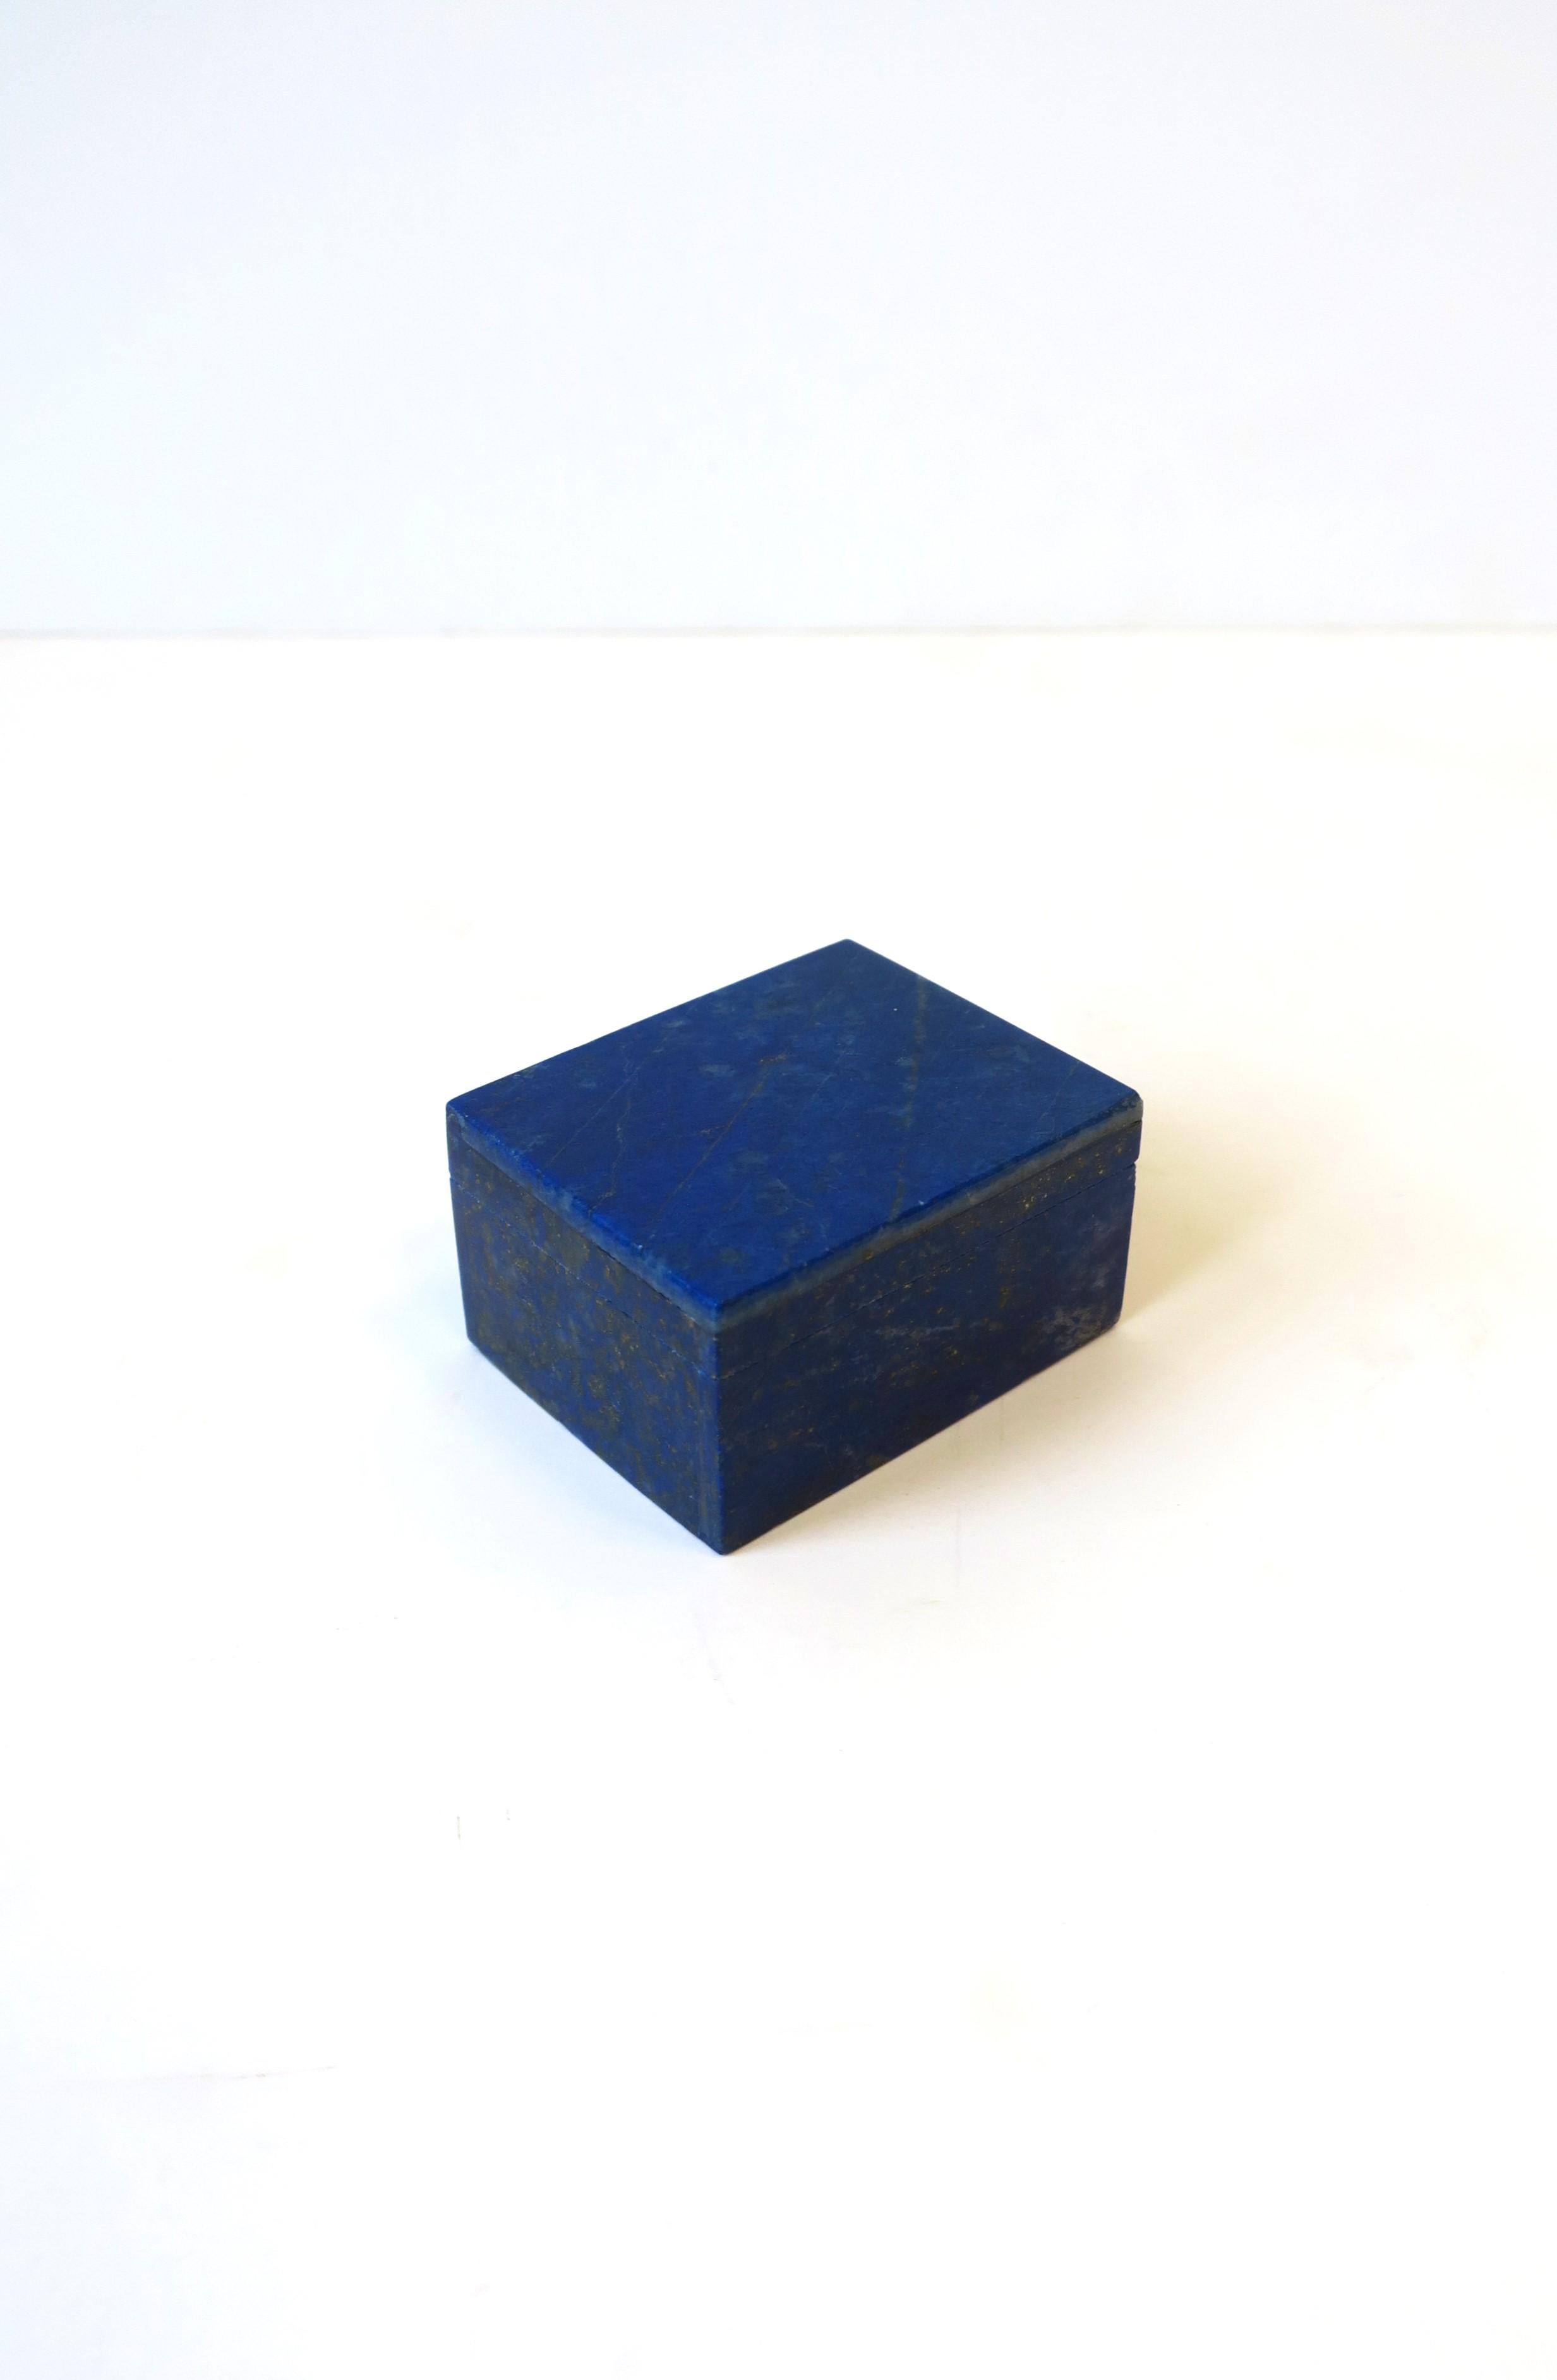 A small rectangular polished blue Lapis lazuli box, with matte white granite marble interior, which to hold jewelry (necklace/charm as shown) or other small items on a vanity, dresser, nightstand table, desk, etc. 

Dimensions: 1.44